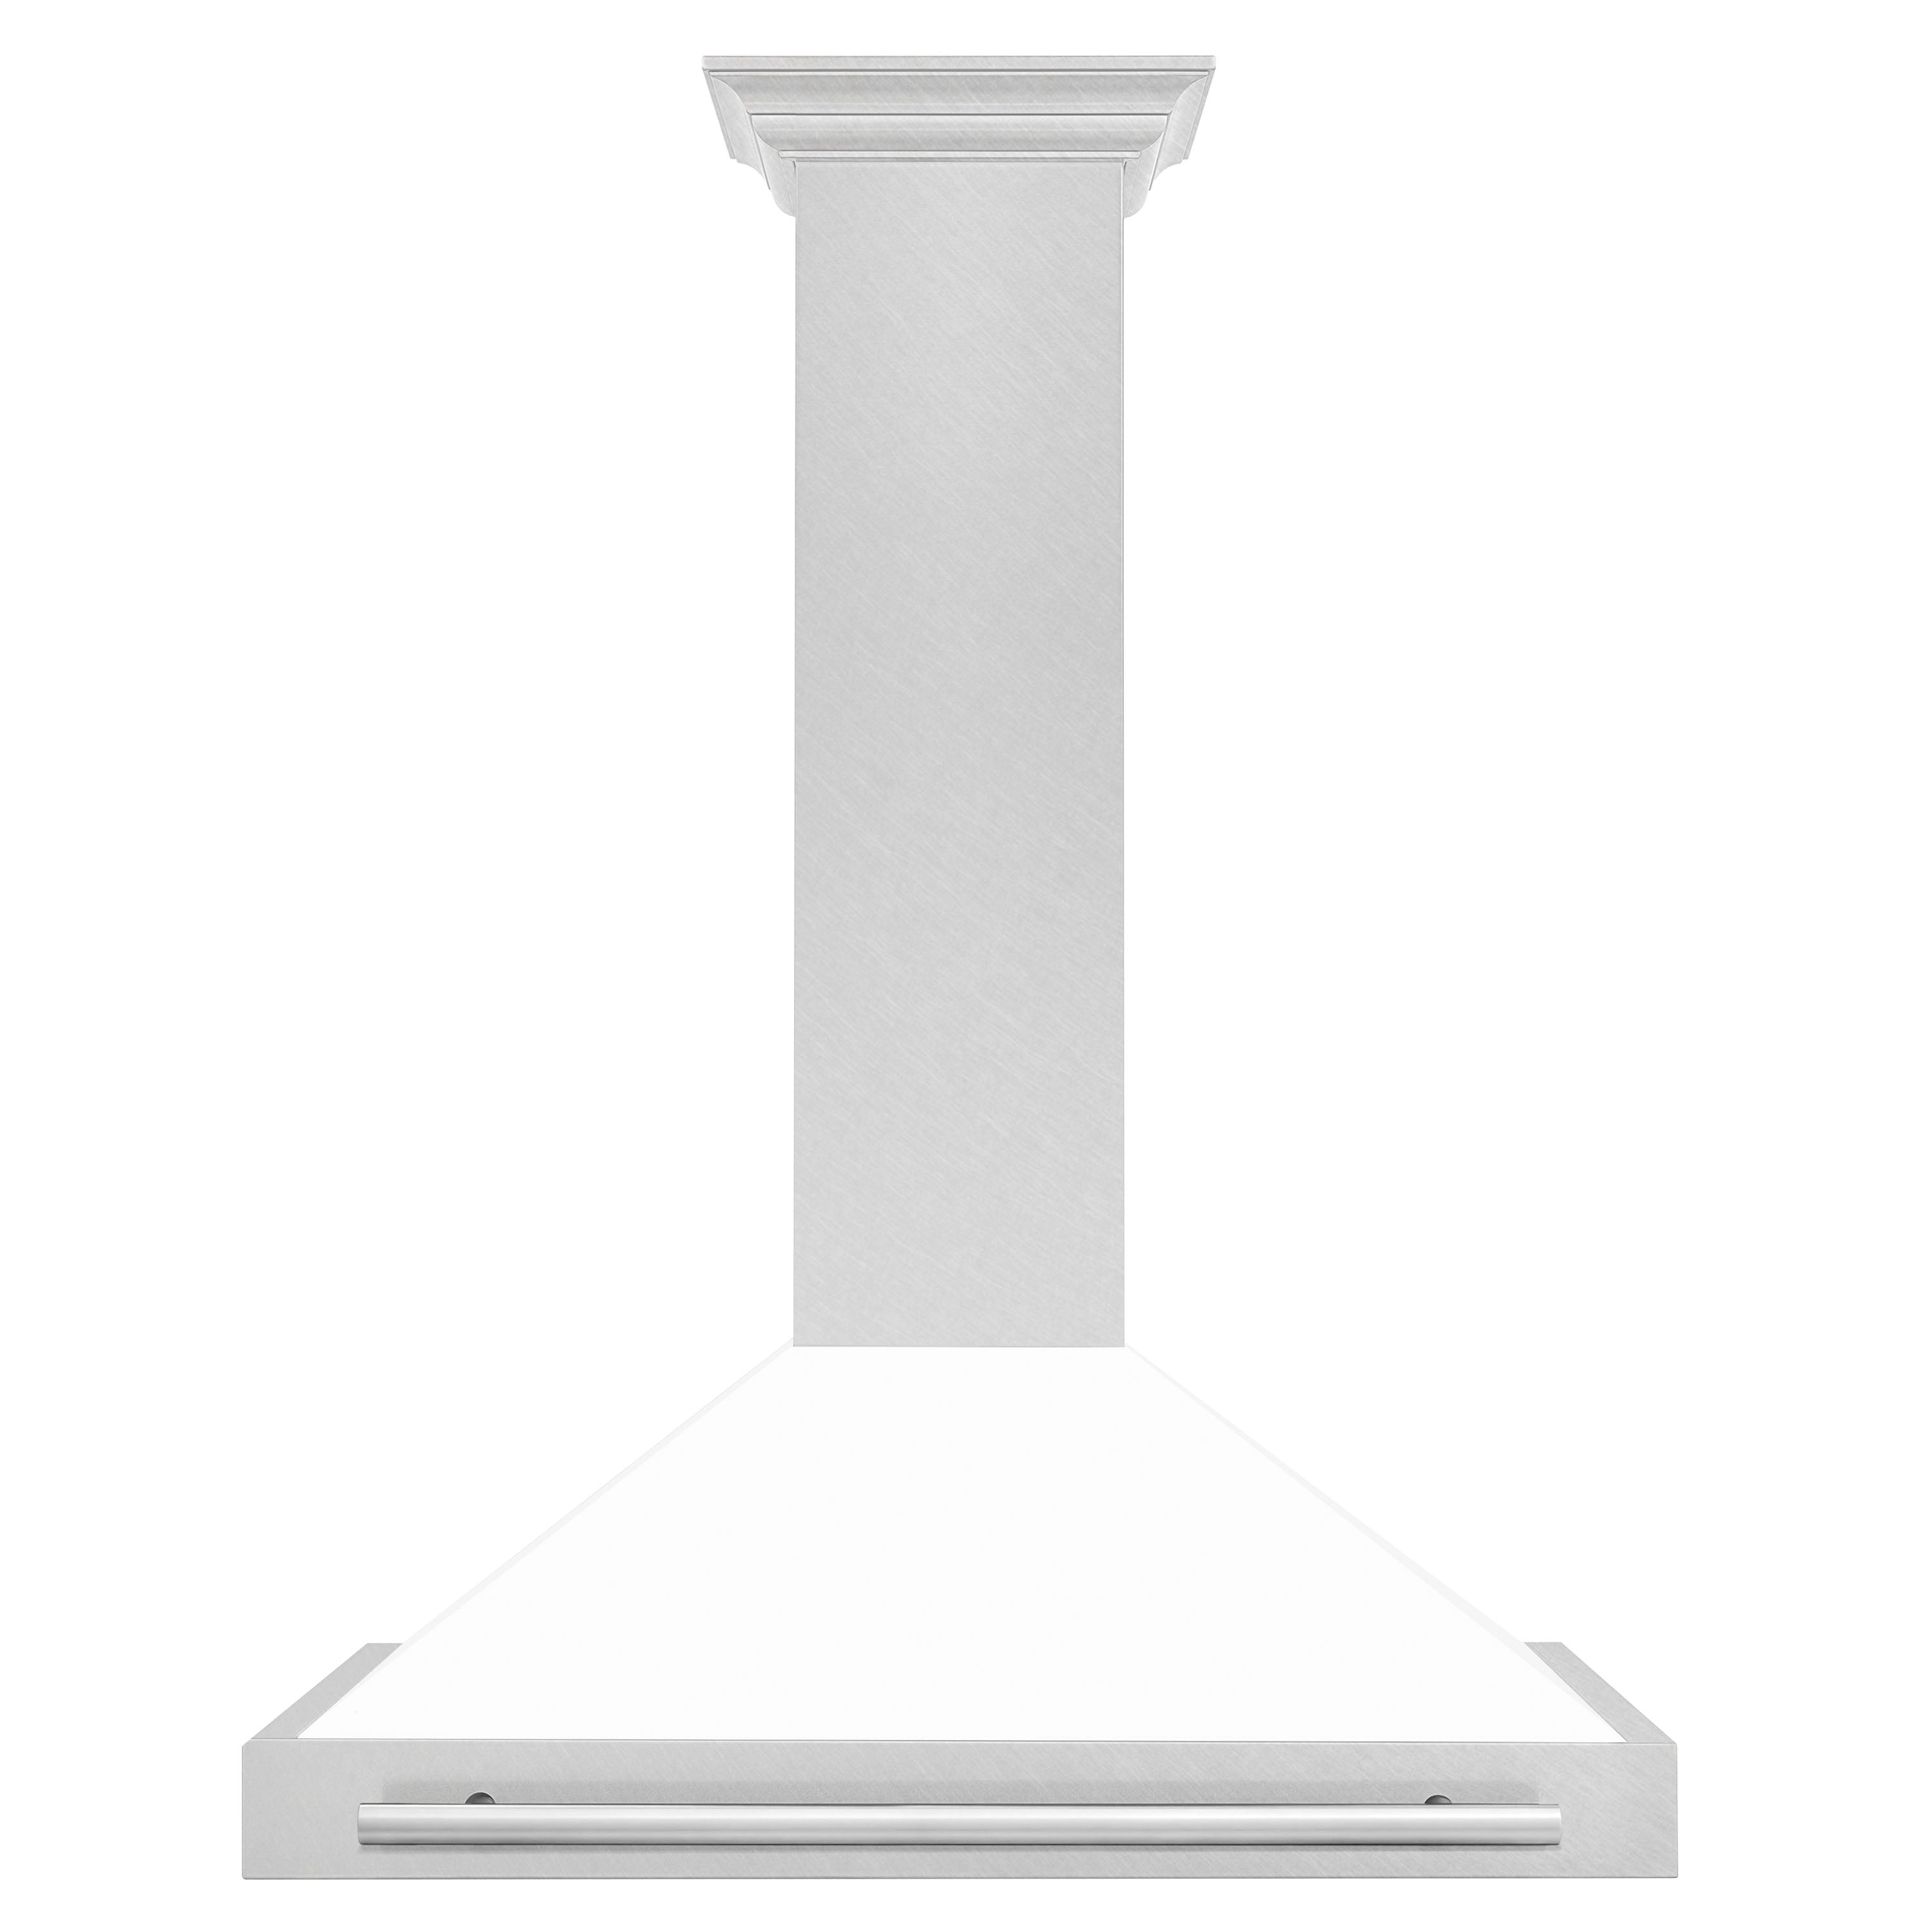 ZLINE 36" Fingerprint Resistant Stainless Steel Range Hood with White Matte Shell and Stainless Steel Handle